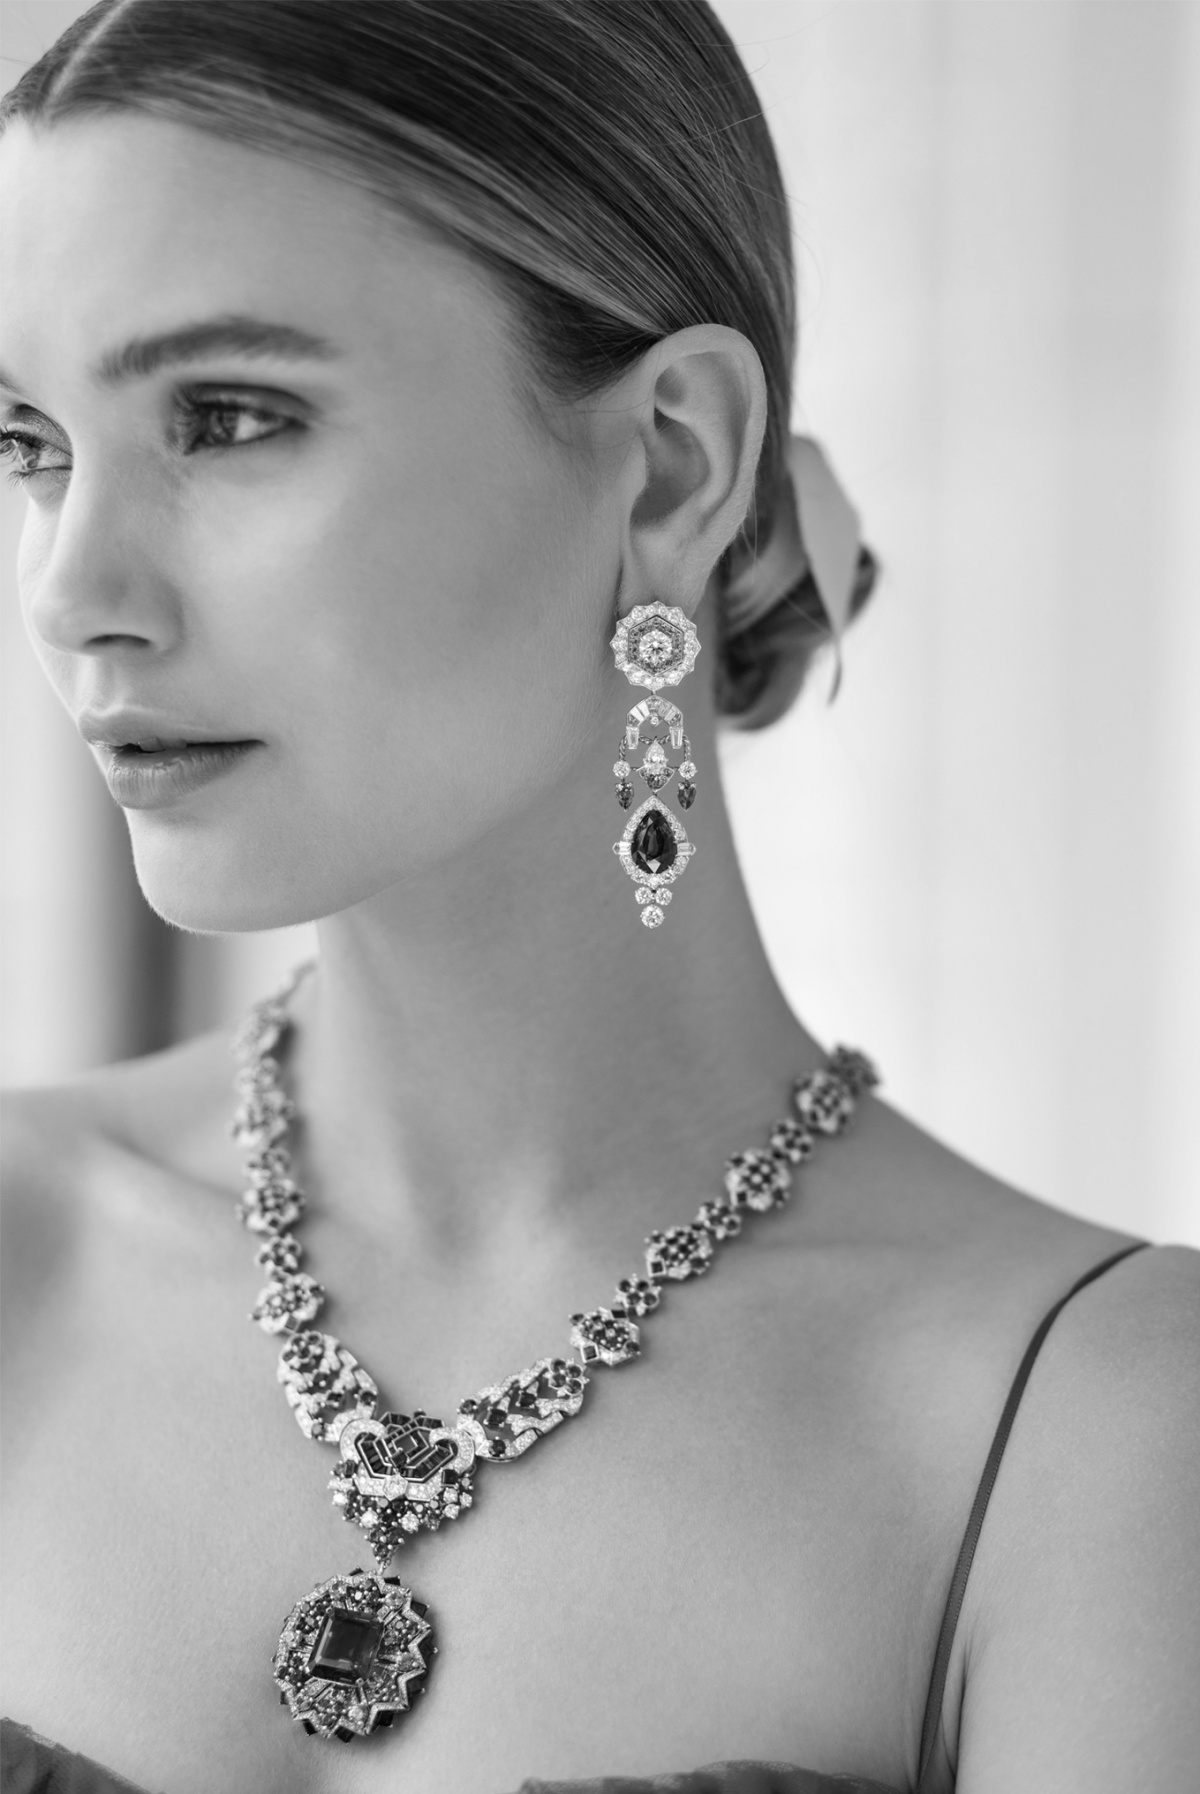 Behind the curtain at Van Cleef & Arpels’s romantic jewellery gala - RUSSH